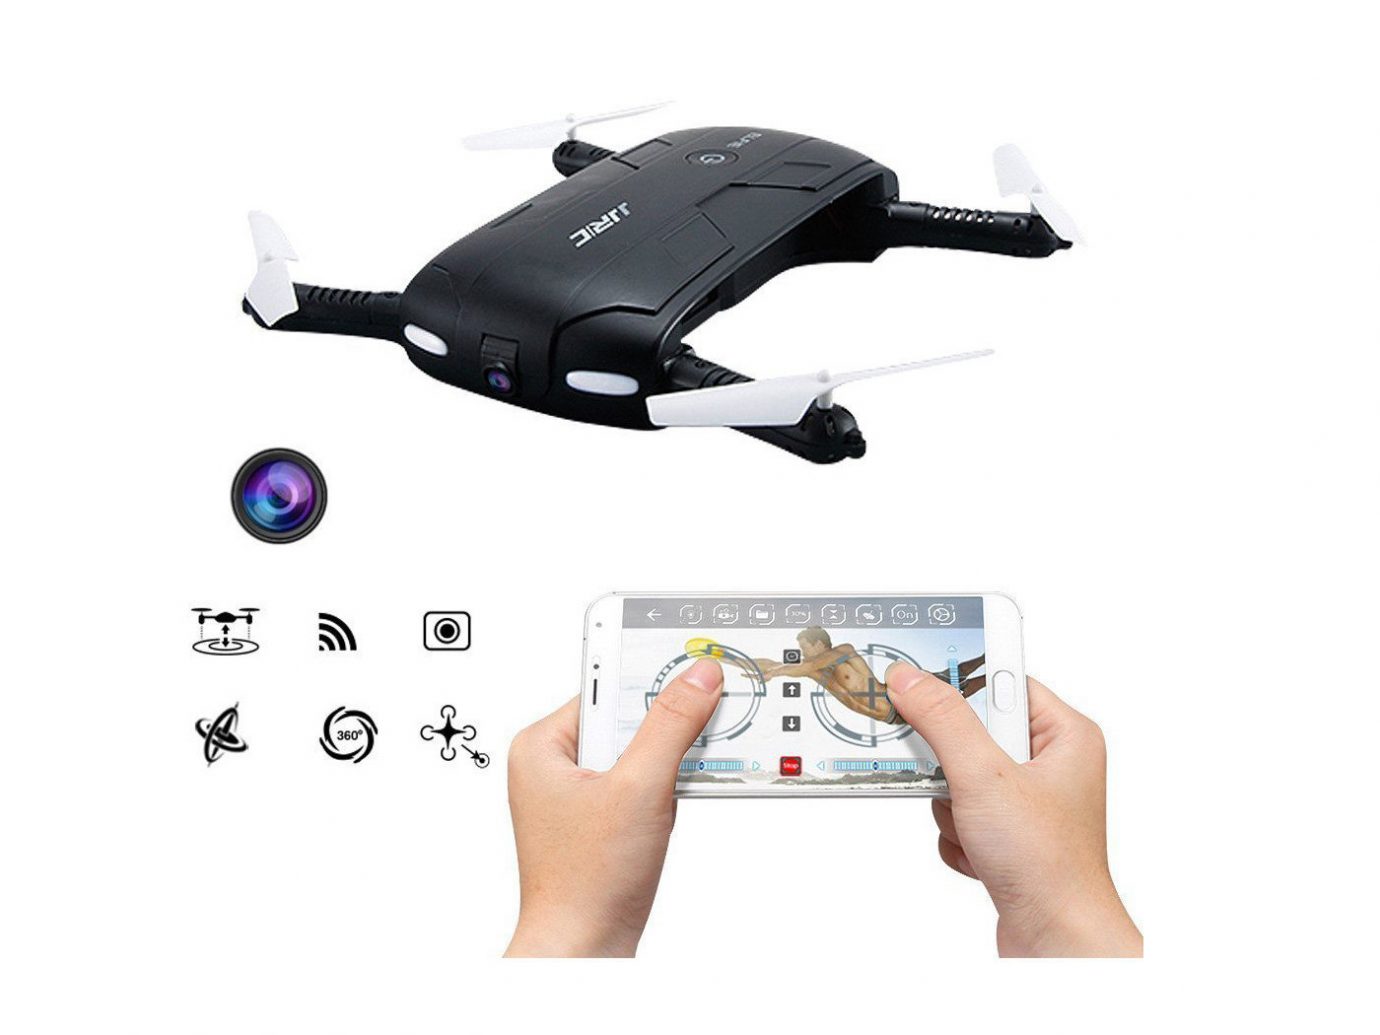 Travel Shop Travel Tech Travel Tips sky automotive exterior helicopter multimedia hand technology finger aircraft